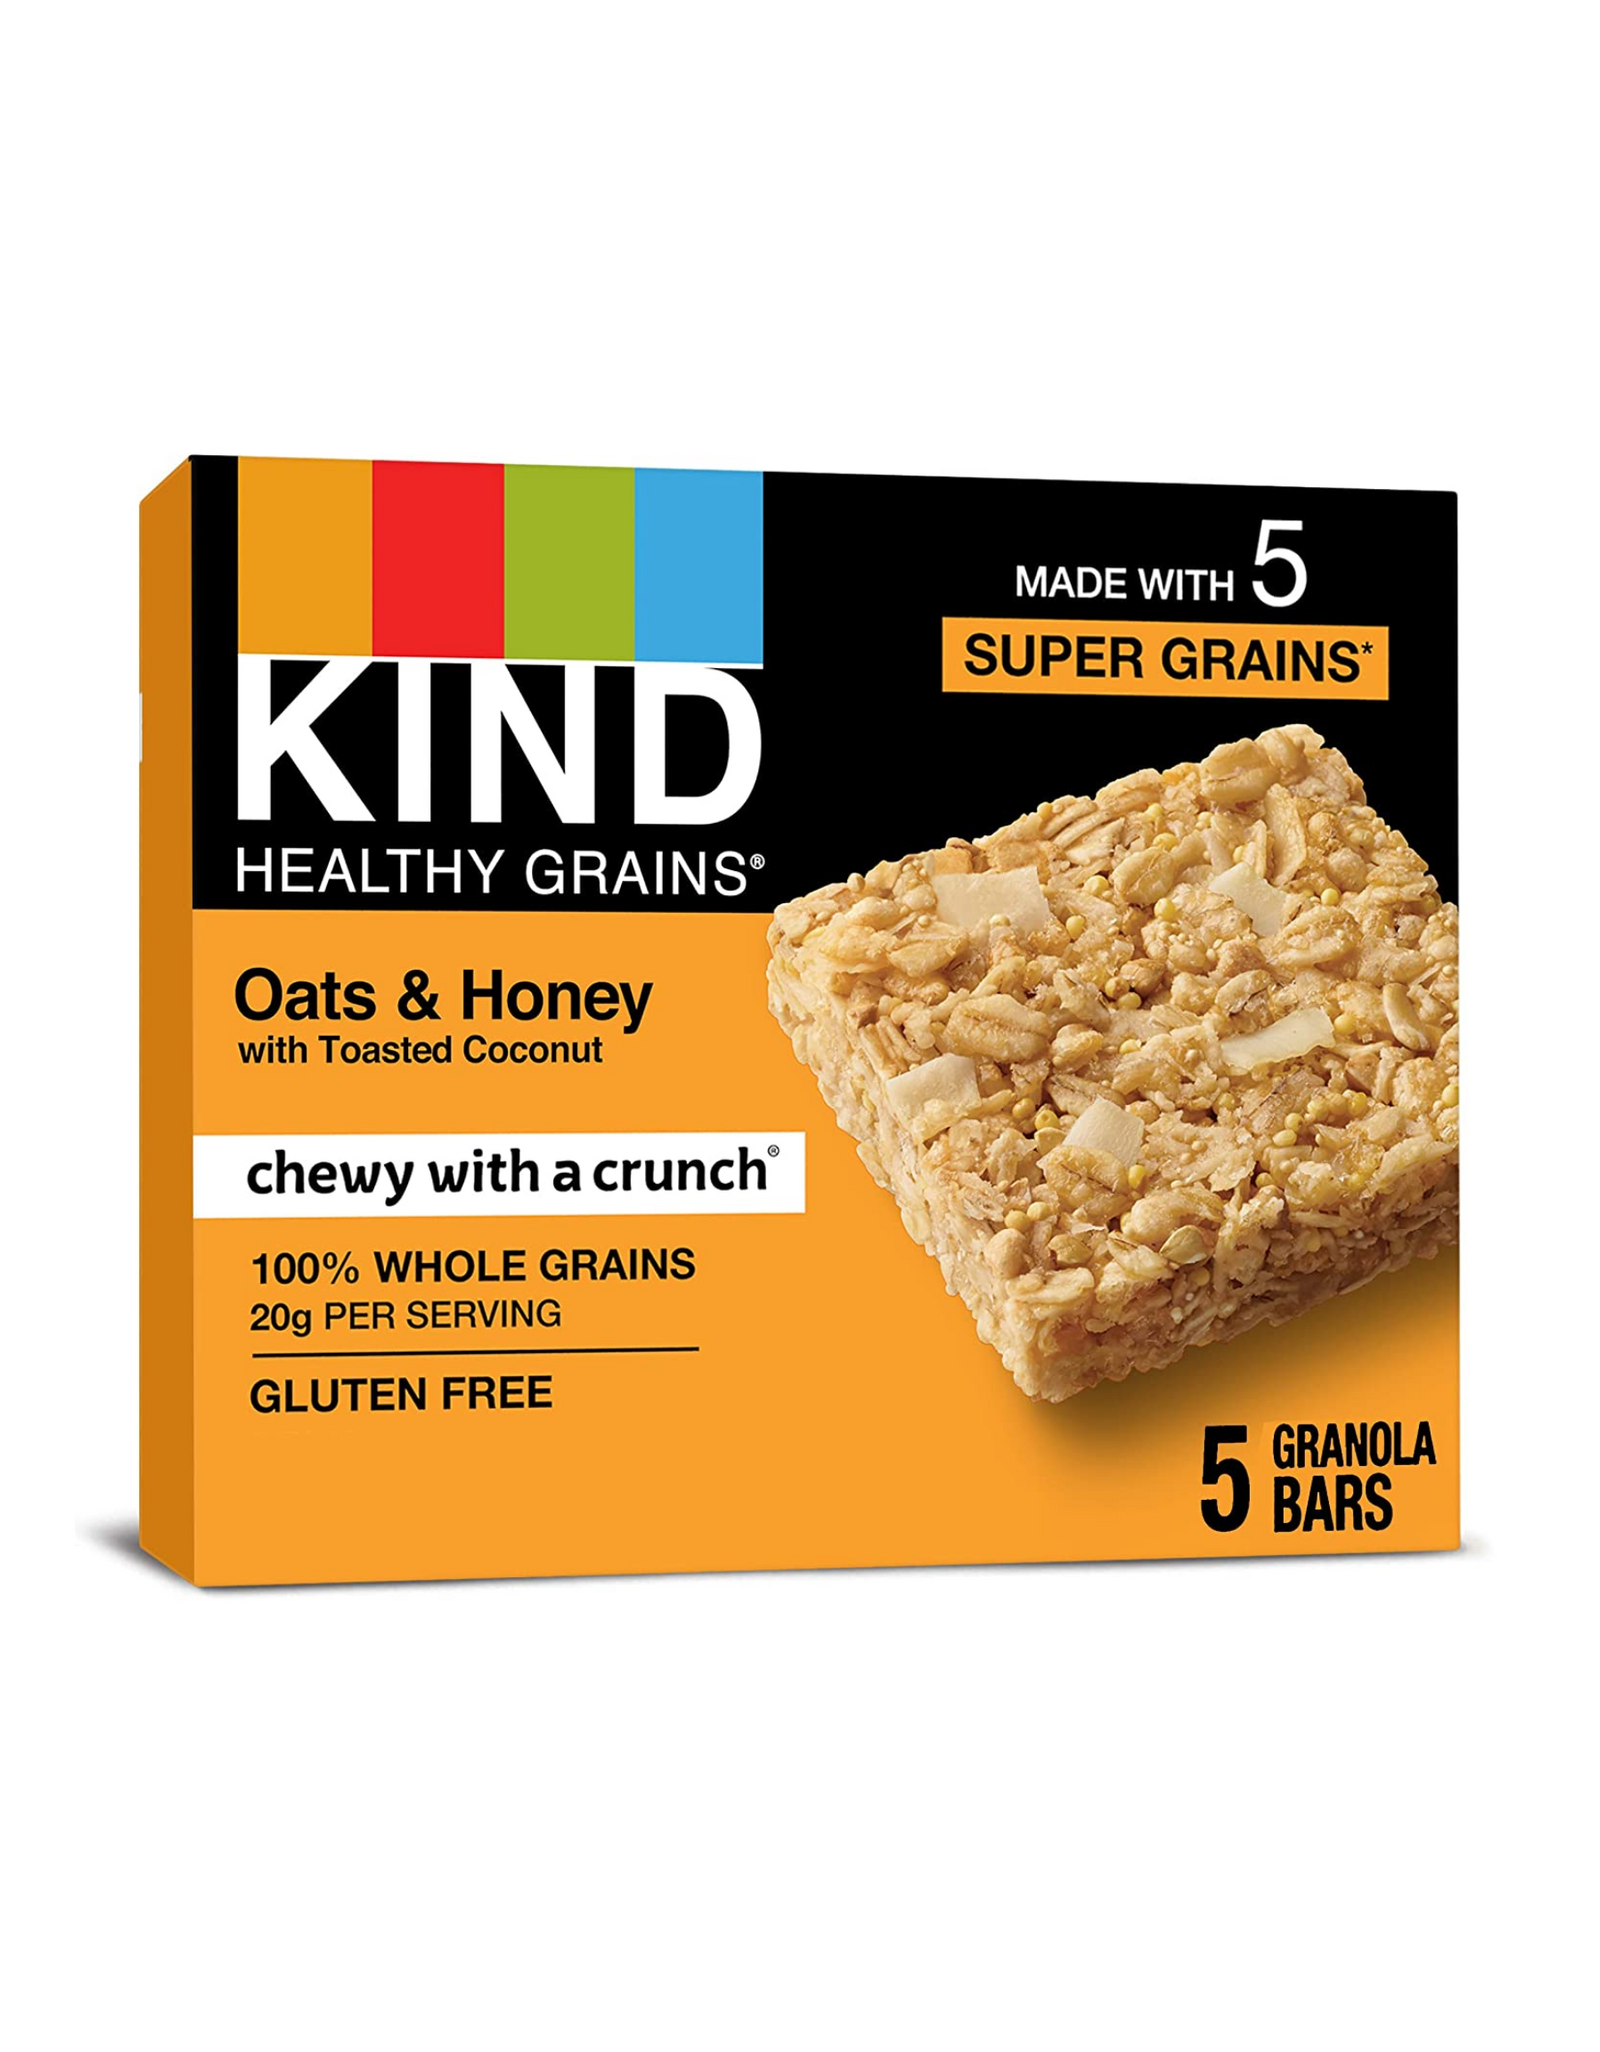 KIND Healthy Grains Bars, Oats & Honey with Toasted Coconut, Whole Grains, Gluten Free, 1.2 oz, 40 Ct